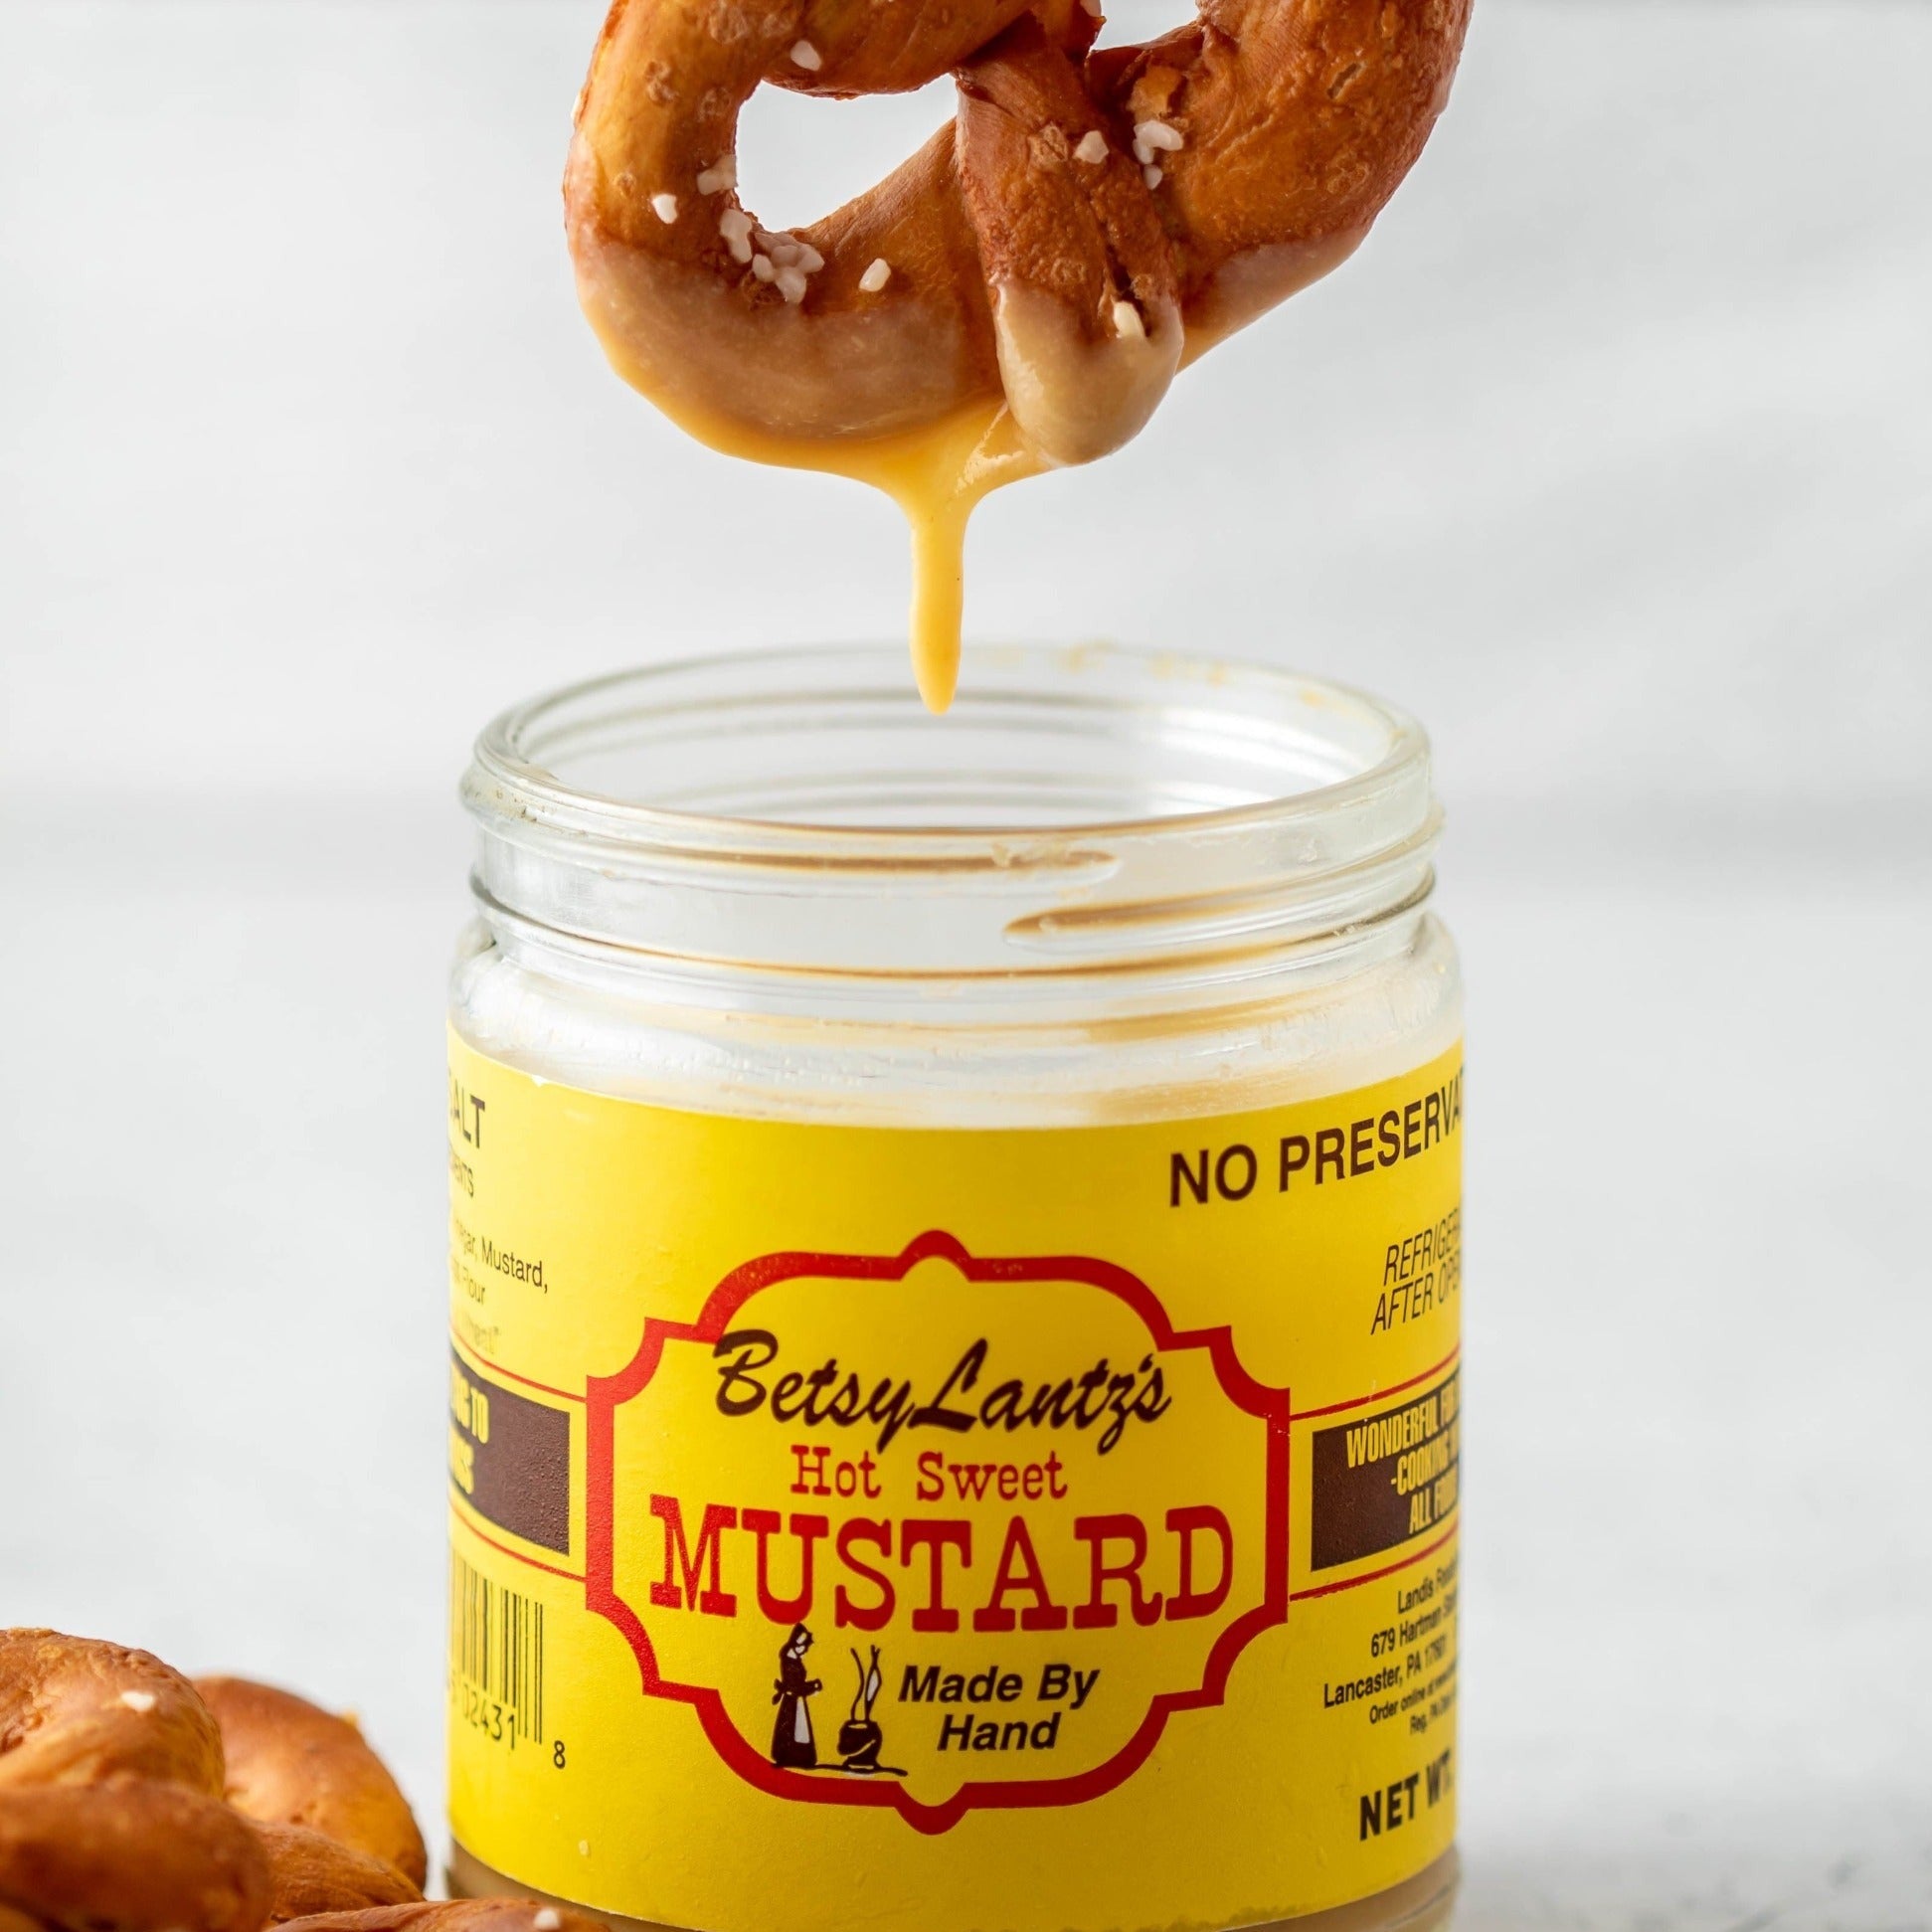 a pretzel being dipped into a jar of mustard